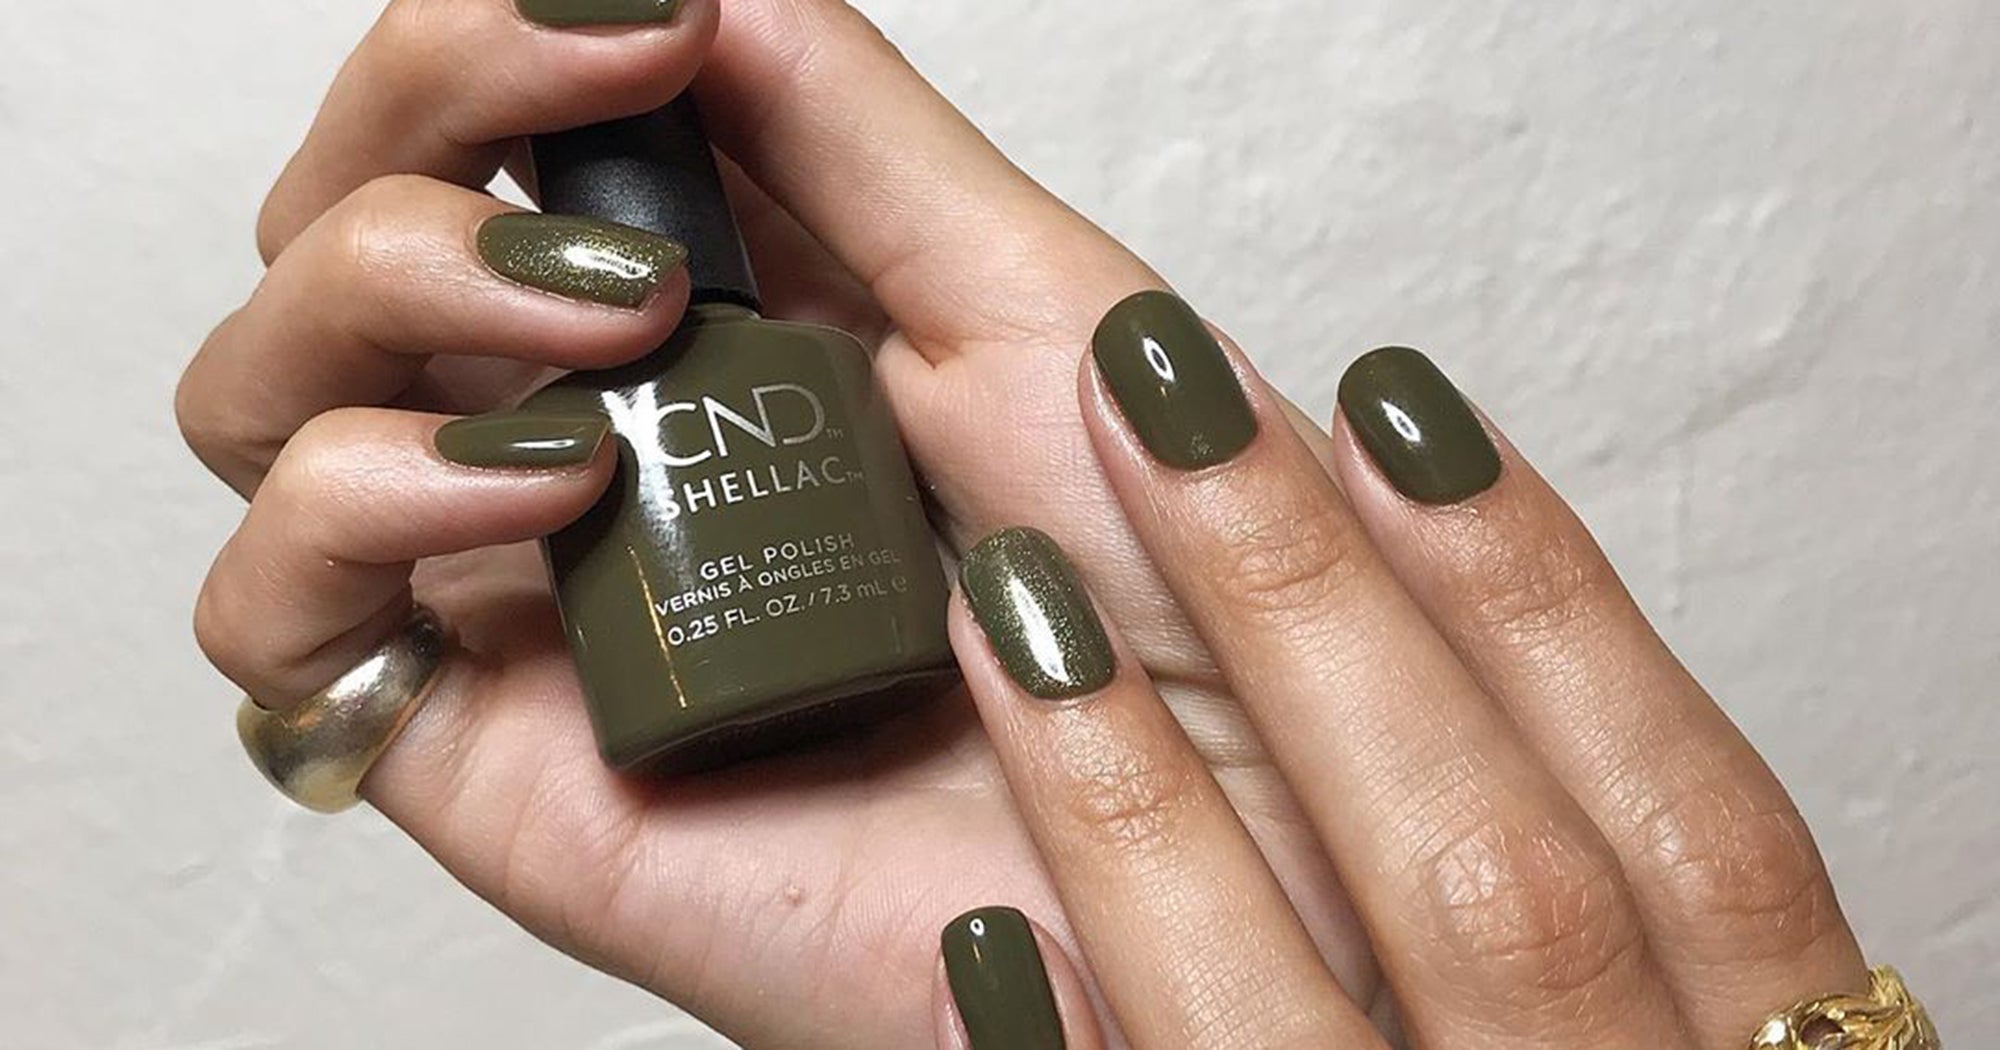 1. "Emerald Green Nail Polish Shades for Your Next Manicure" - wide 2